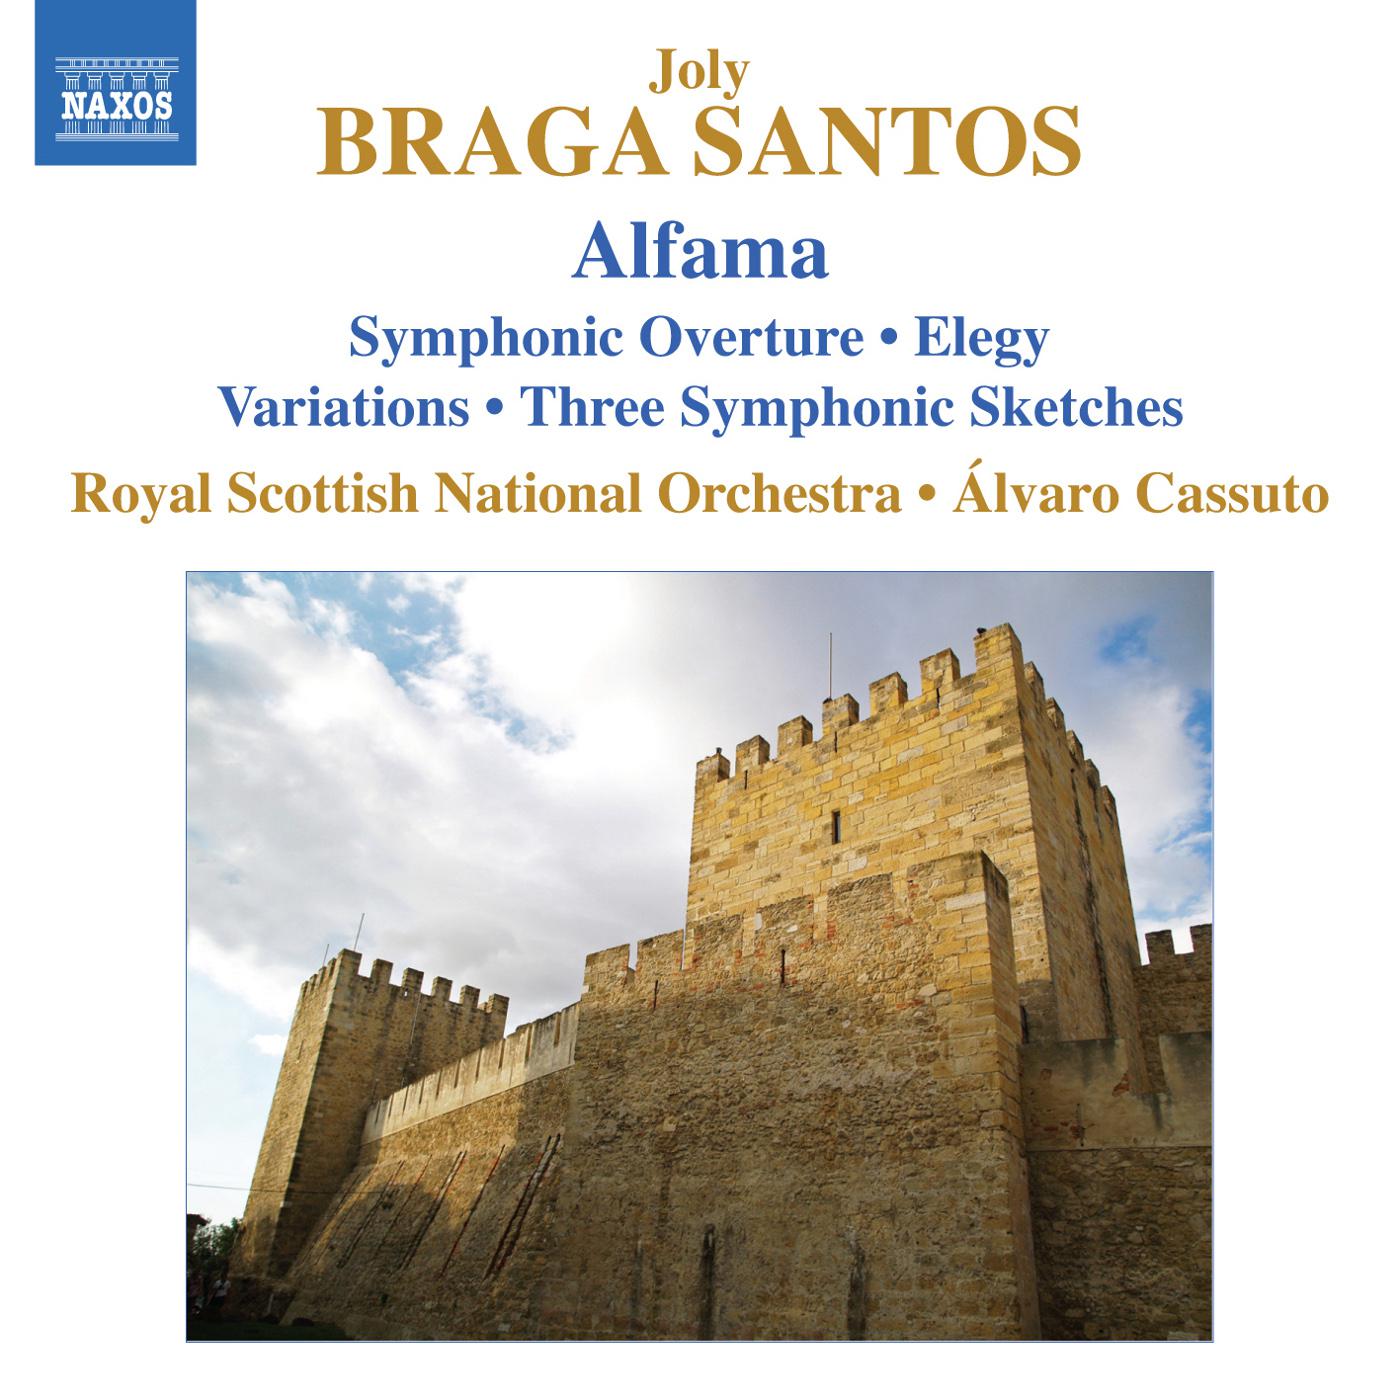 Royal Scottish National Orchestra - 3 Symphonic Sketches, Op. 34:No. 3. Allegro